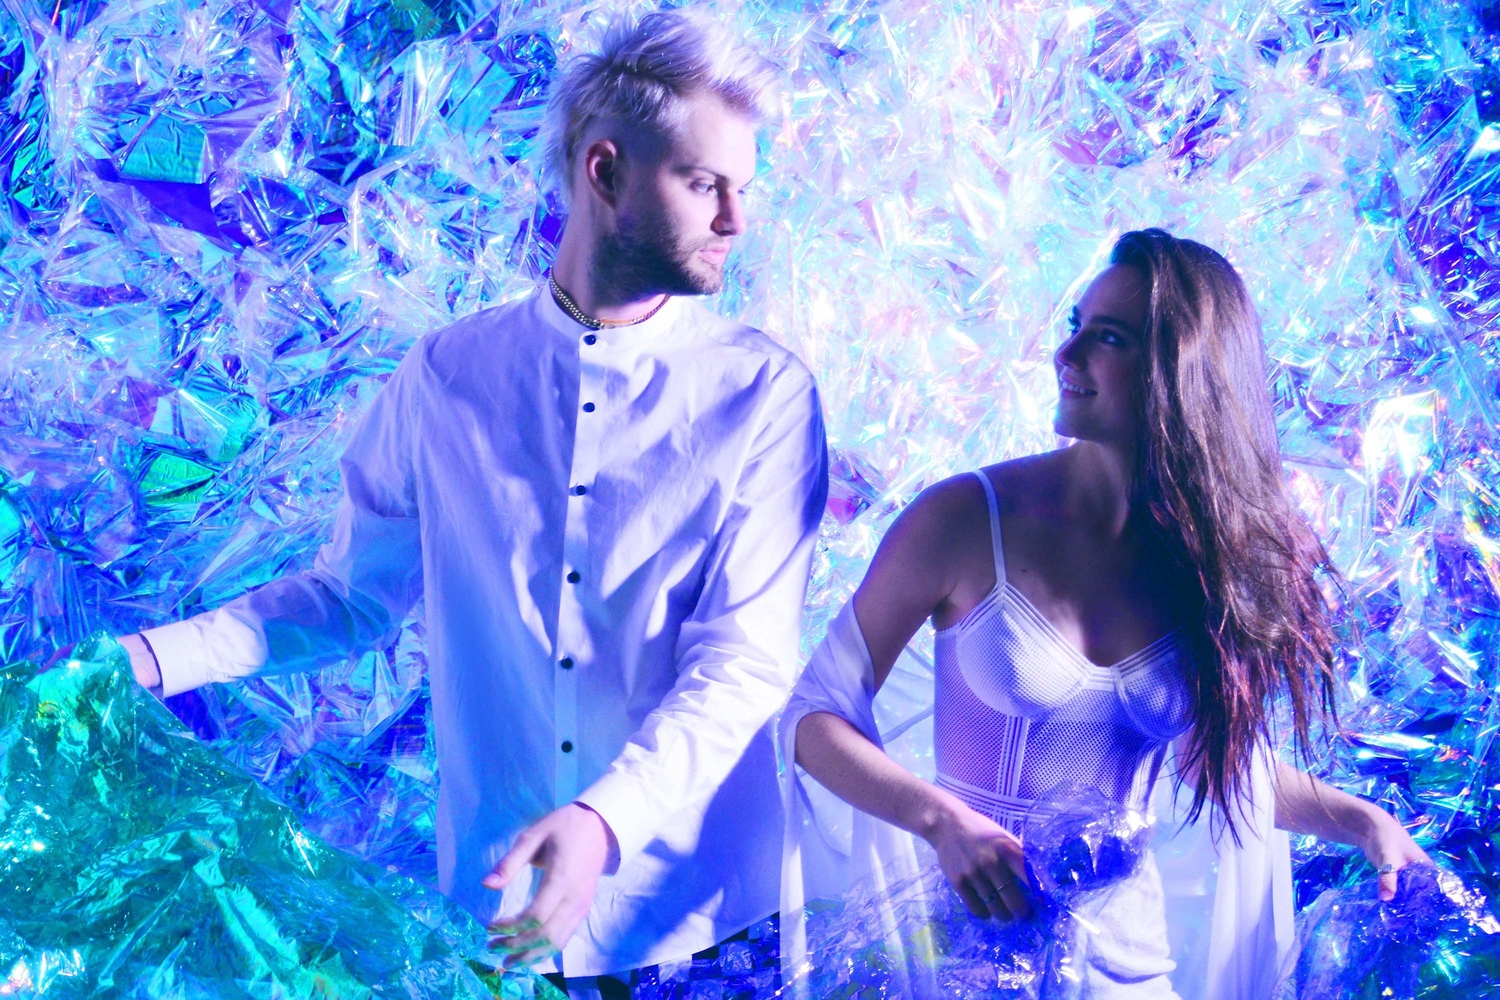 Sofi Tukker team up with Pabllo Vittar for ‘Energia (Parte 2)’ video